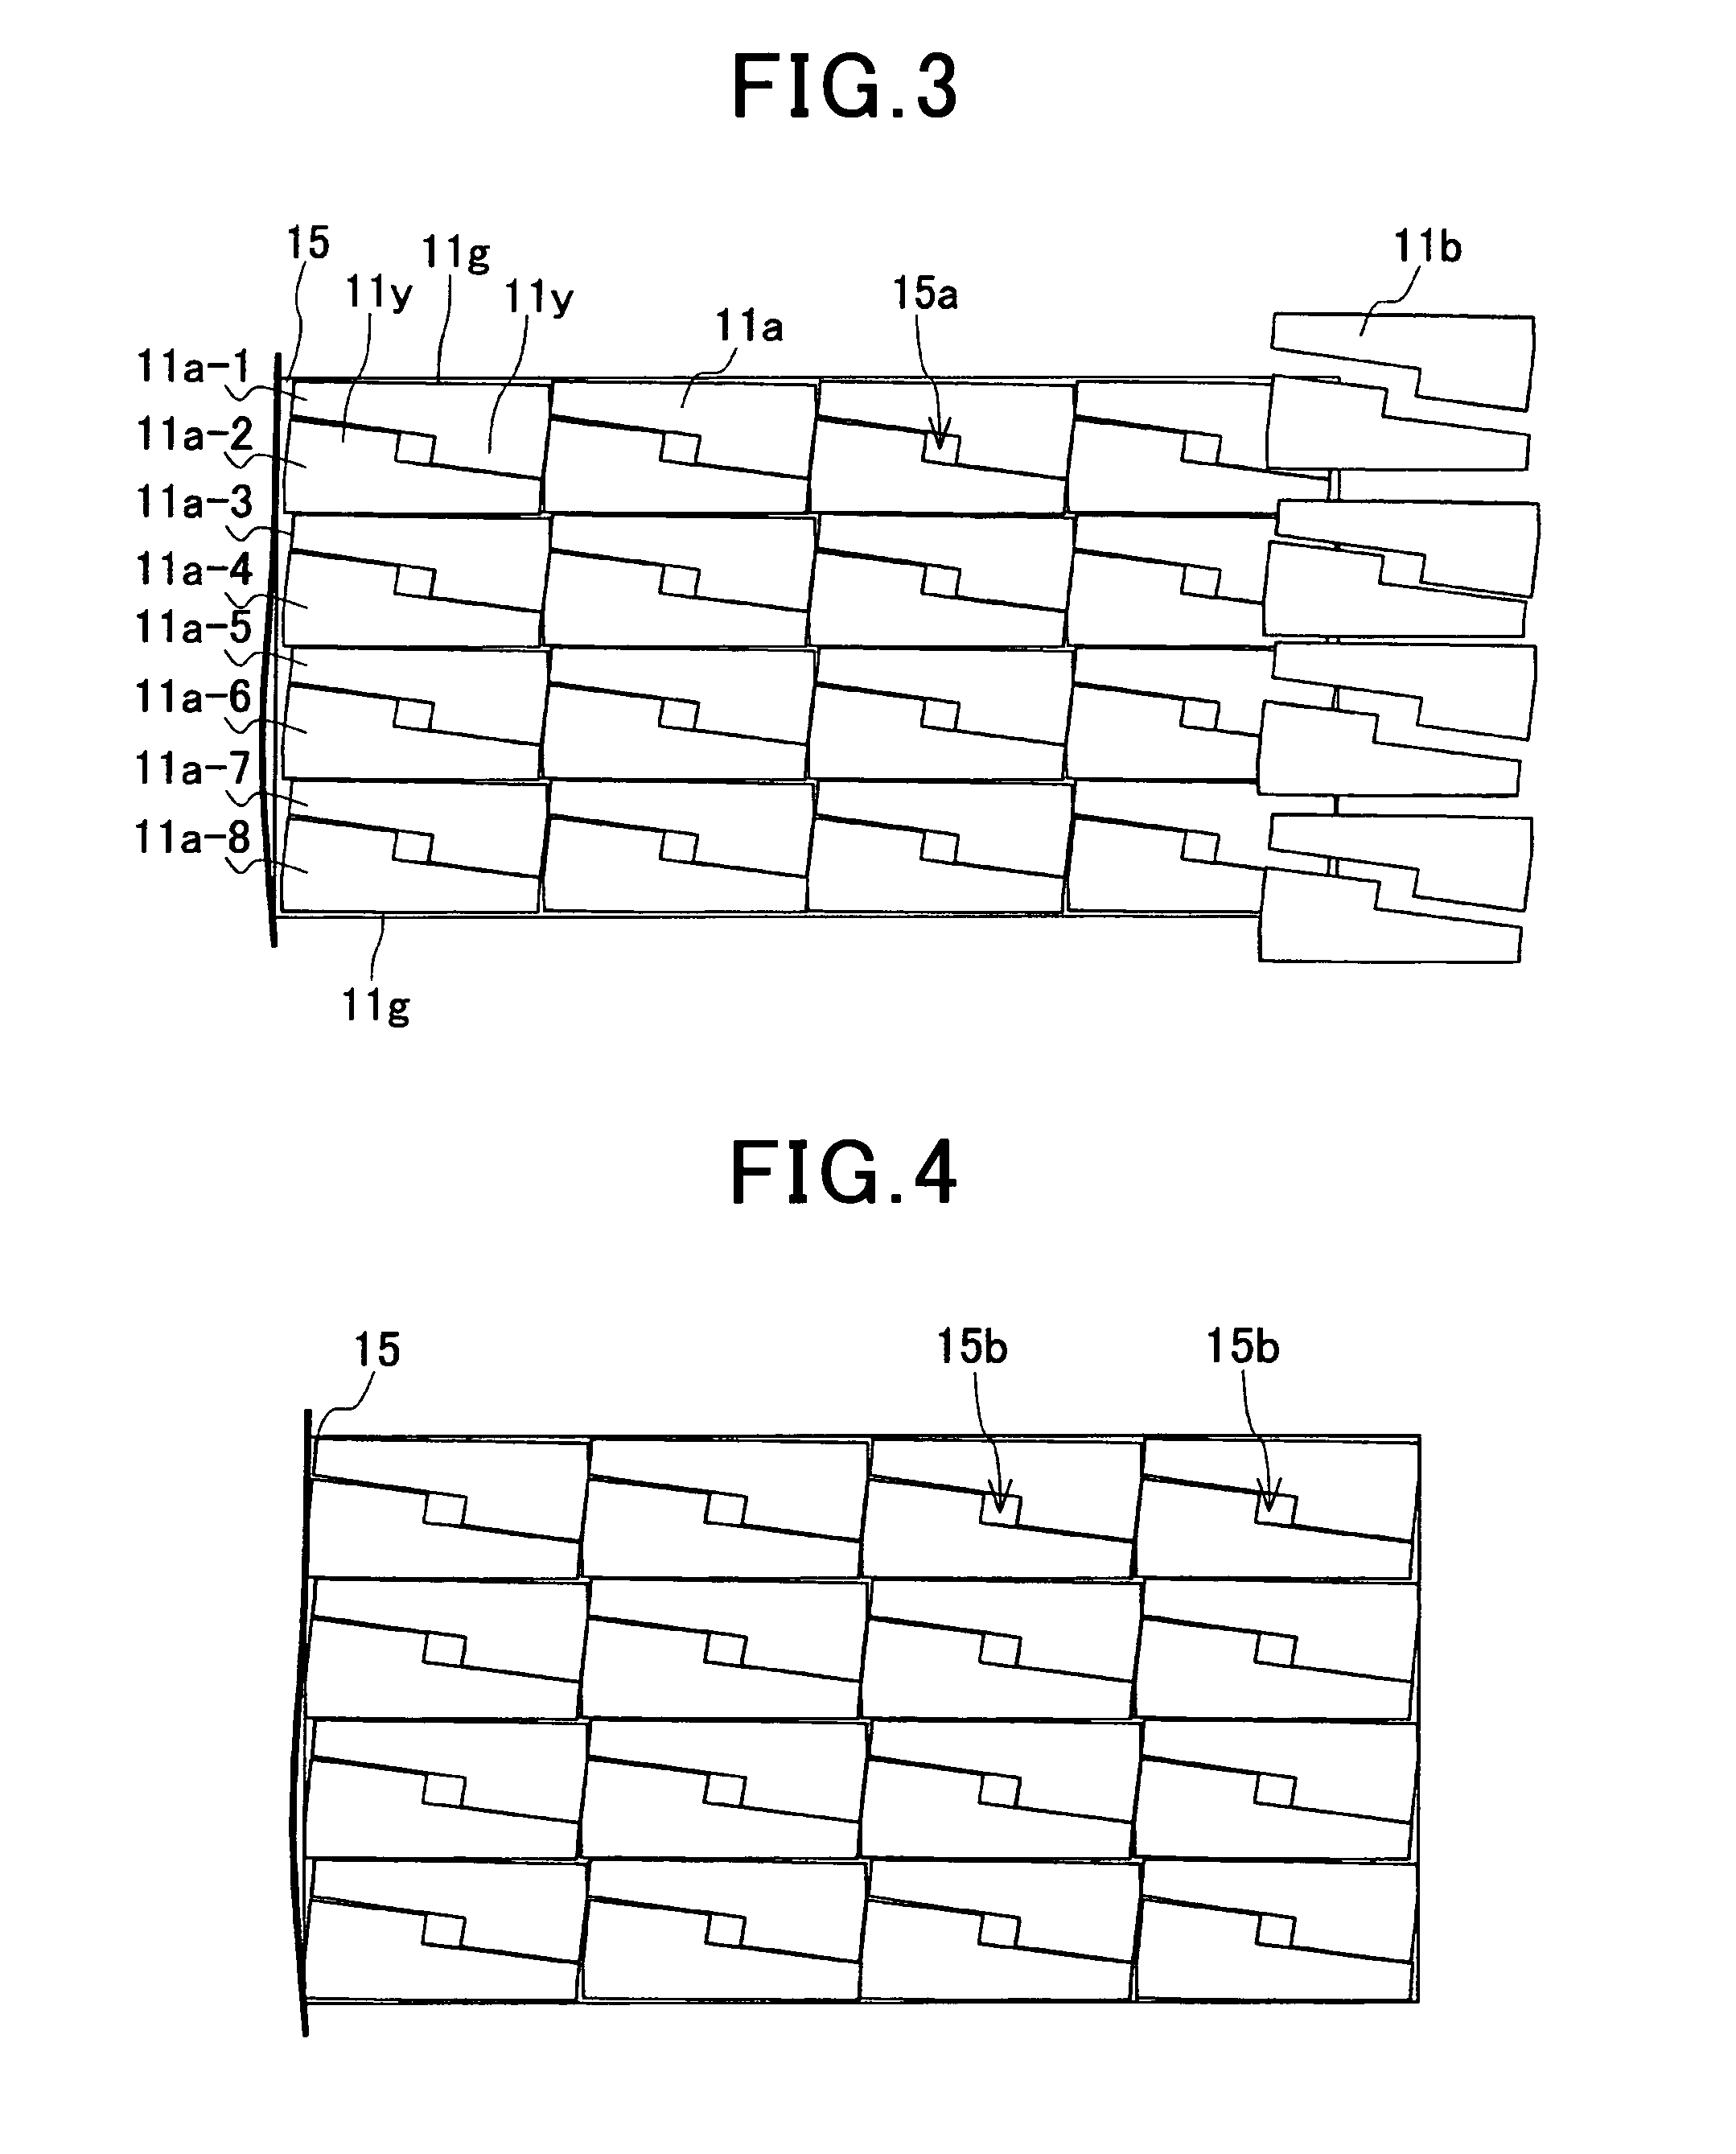 Segment core forming stator core of rotary electric machine and method for manufacturing the segment core